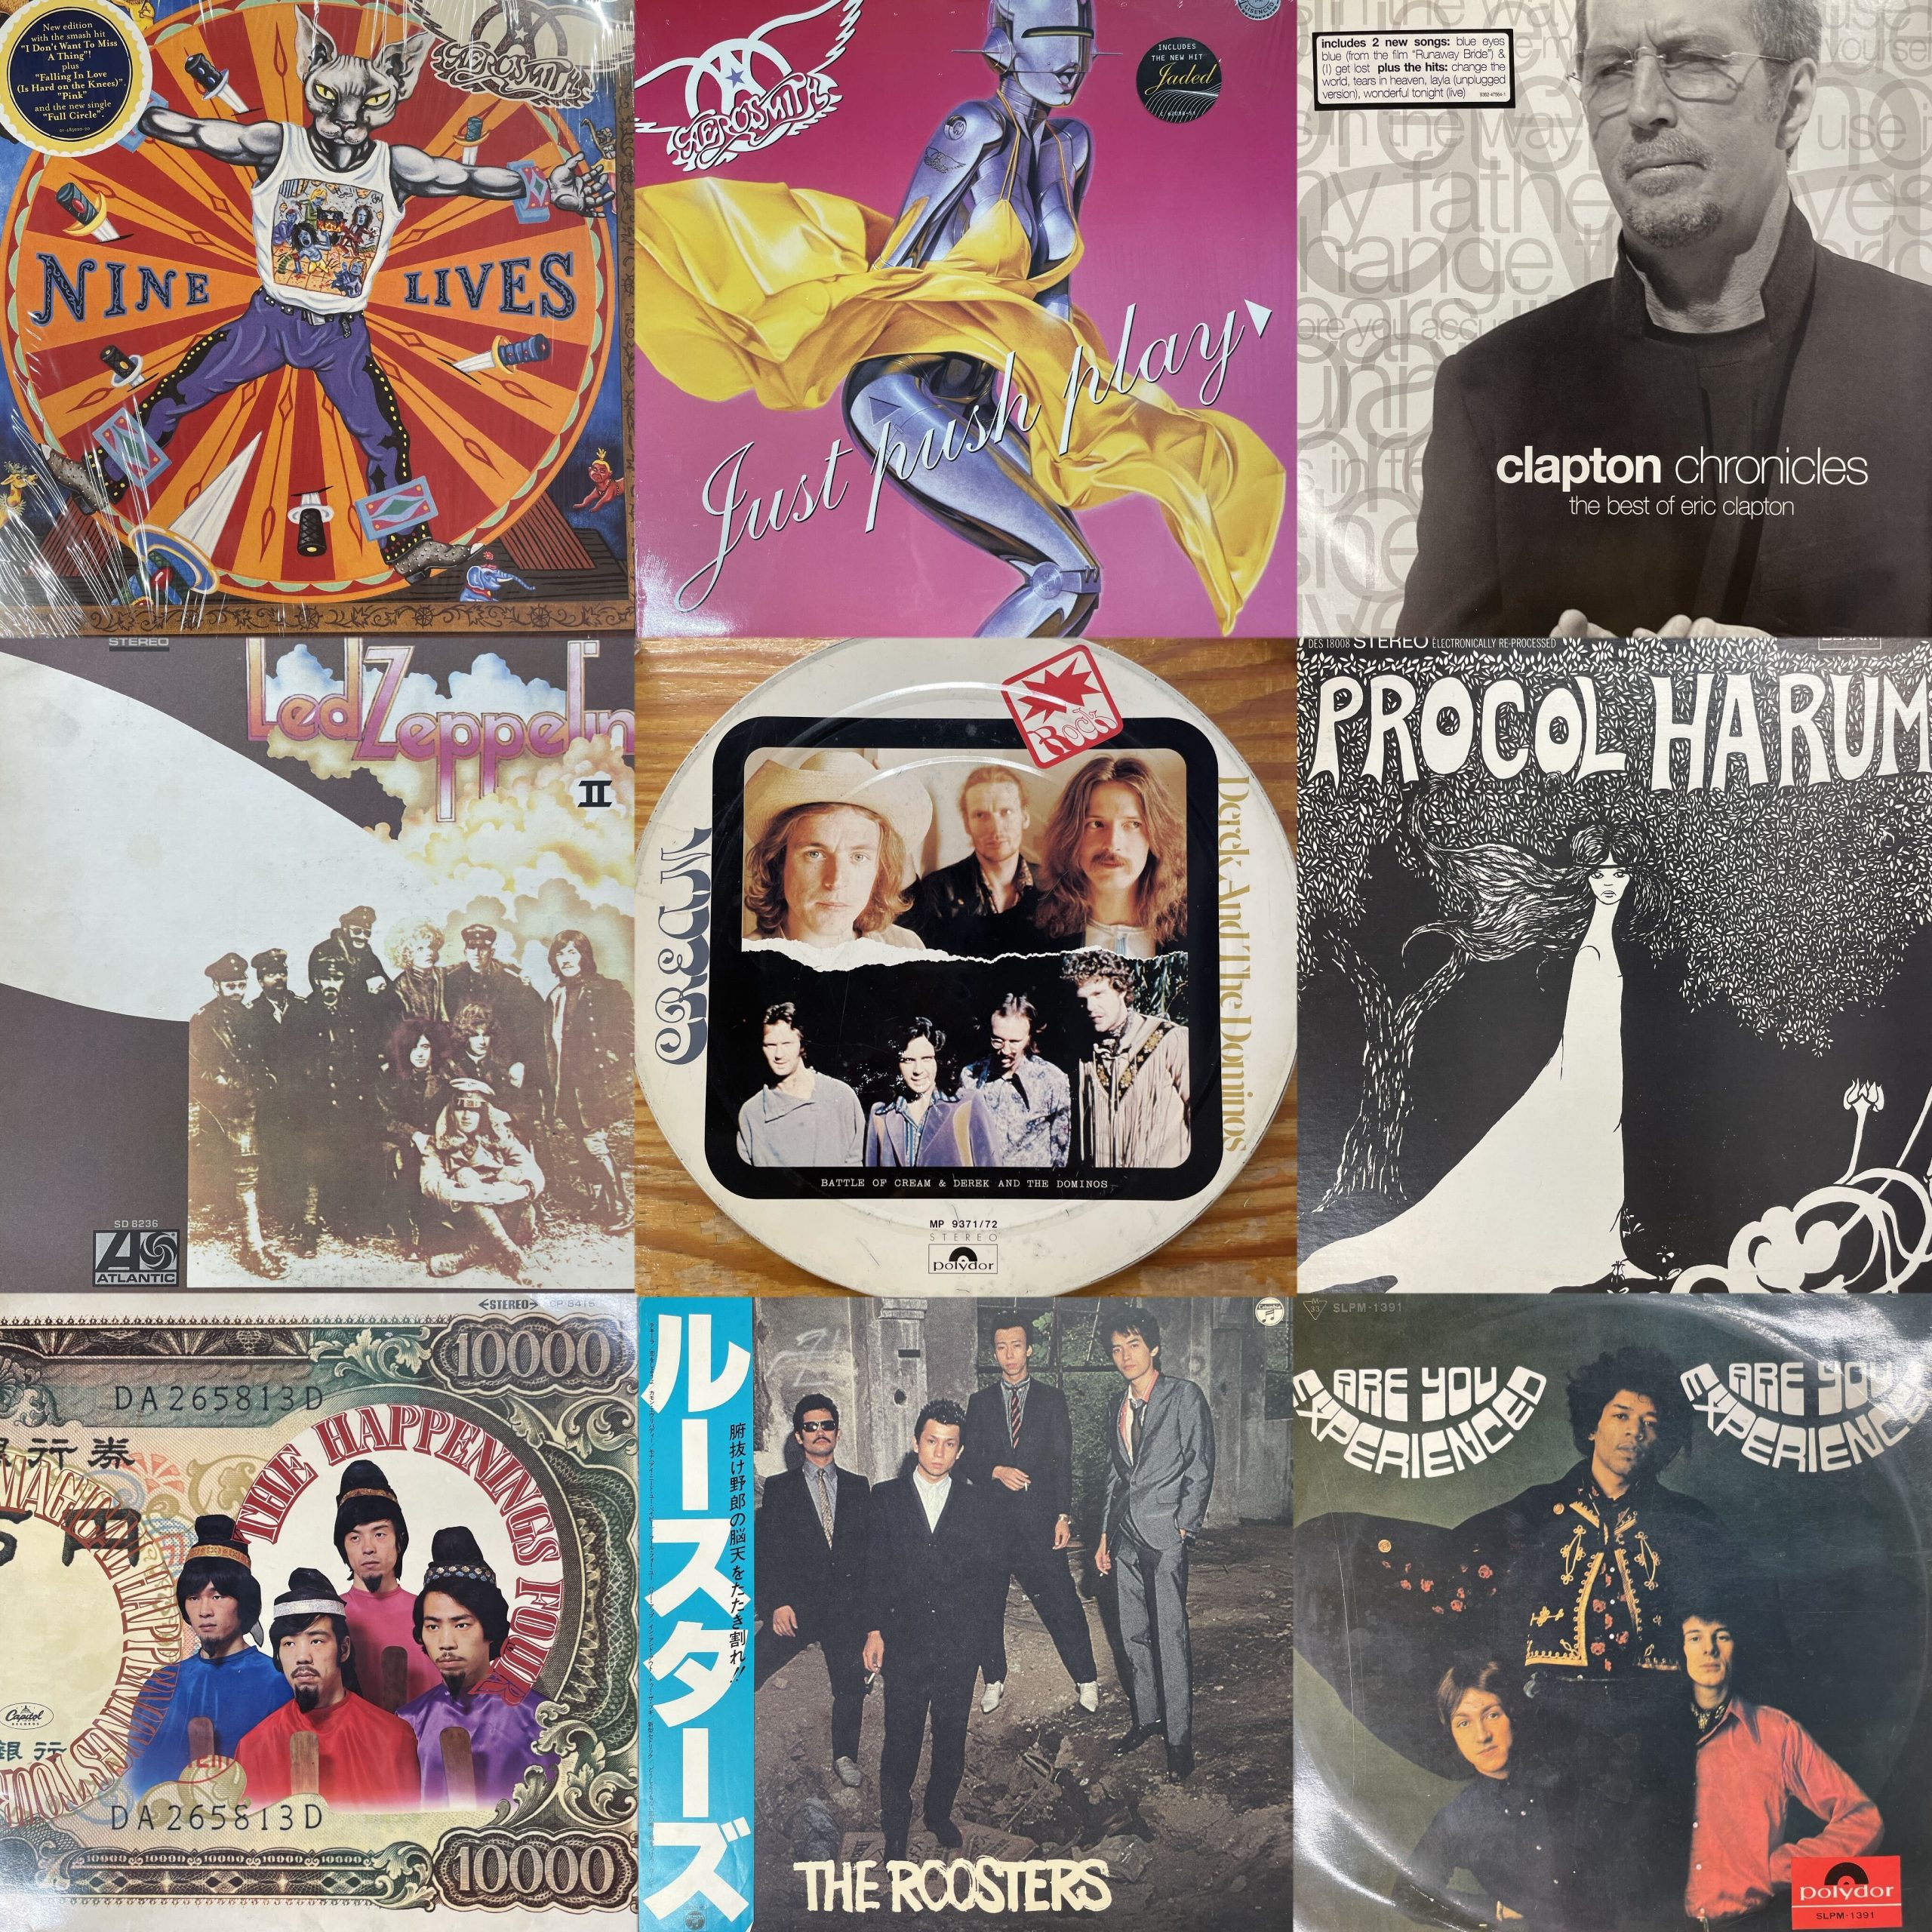 2023/9/14(THU) ROCK 7INCH+LP SALE 約120枚 放出 – General Record Store